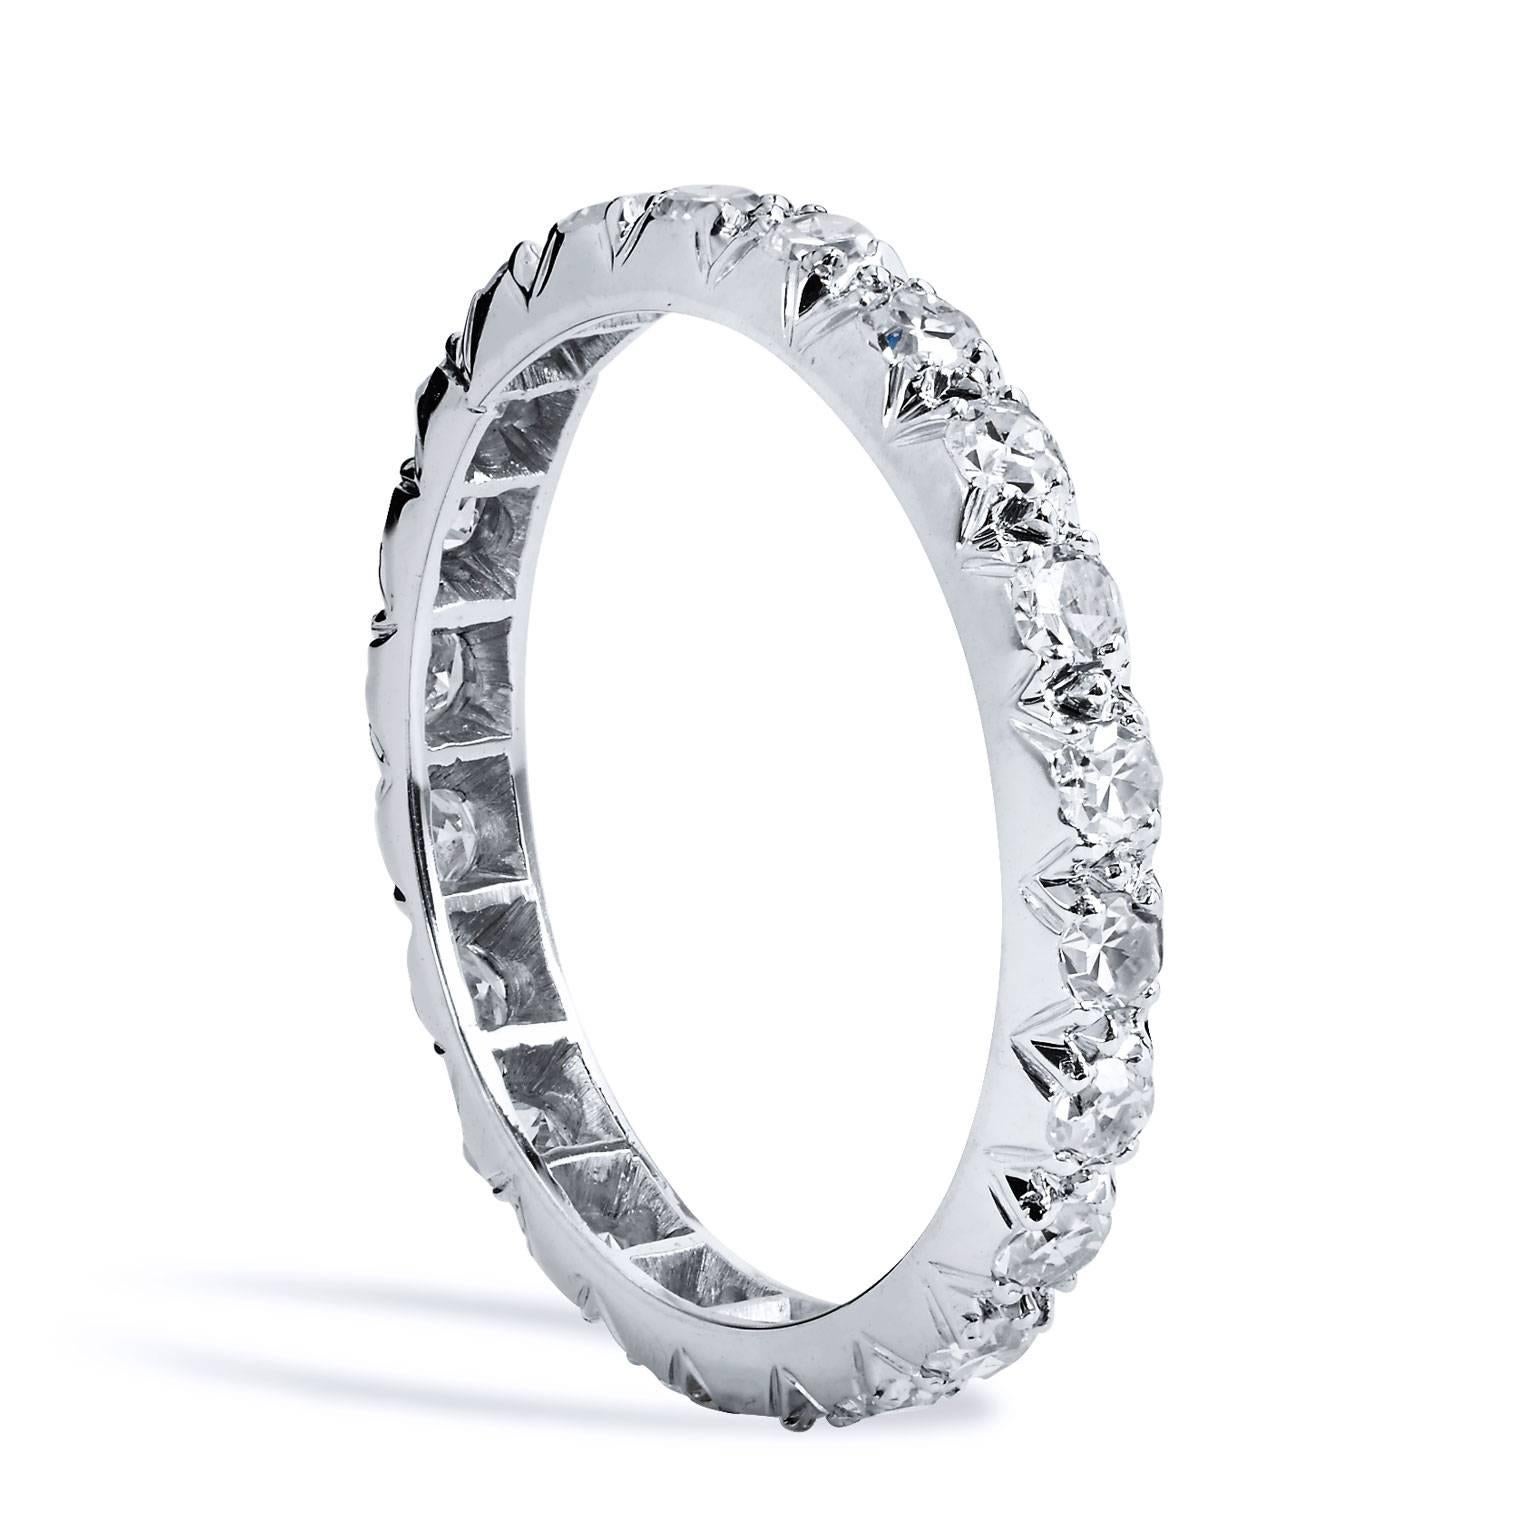 Estate 0.46 Carat Single Cut Diamond Eternity Band Ring Size 4.5

Enjoy this previously loved band ring  featuring 0.46 carat of single cut diamonds (F/G/VS) in channel setting. 
An exquisite piece with pristine color and clarity.
This estate piece